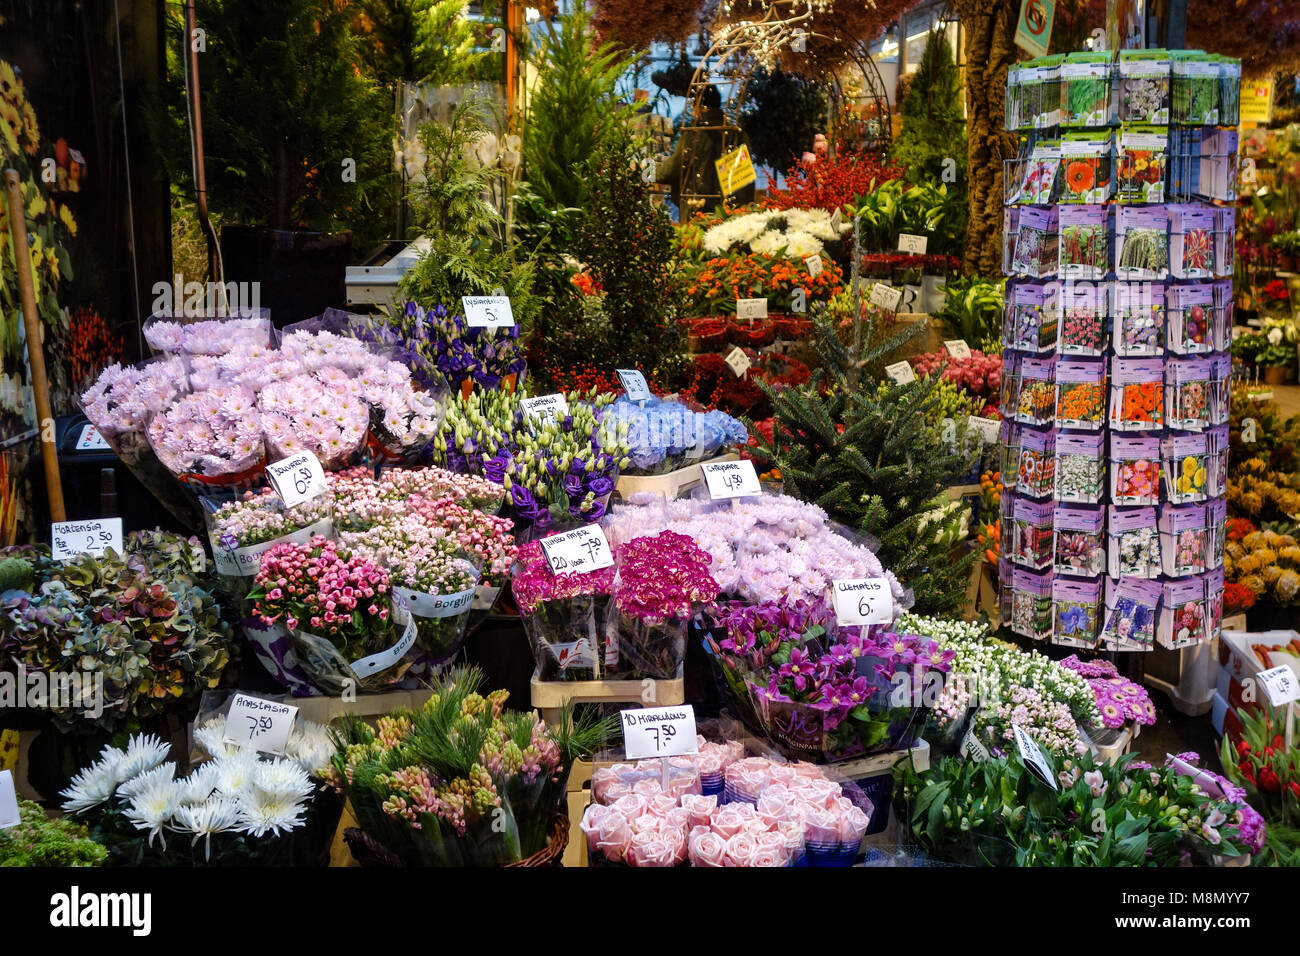 Dec 20, 2017 - Flowers and seeds on sale at the Bloemenmarkt, Flower Market, Amsterdam, Holland Stock Photo